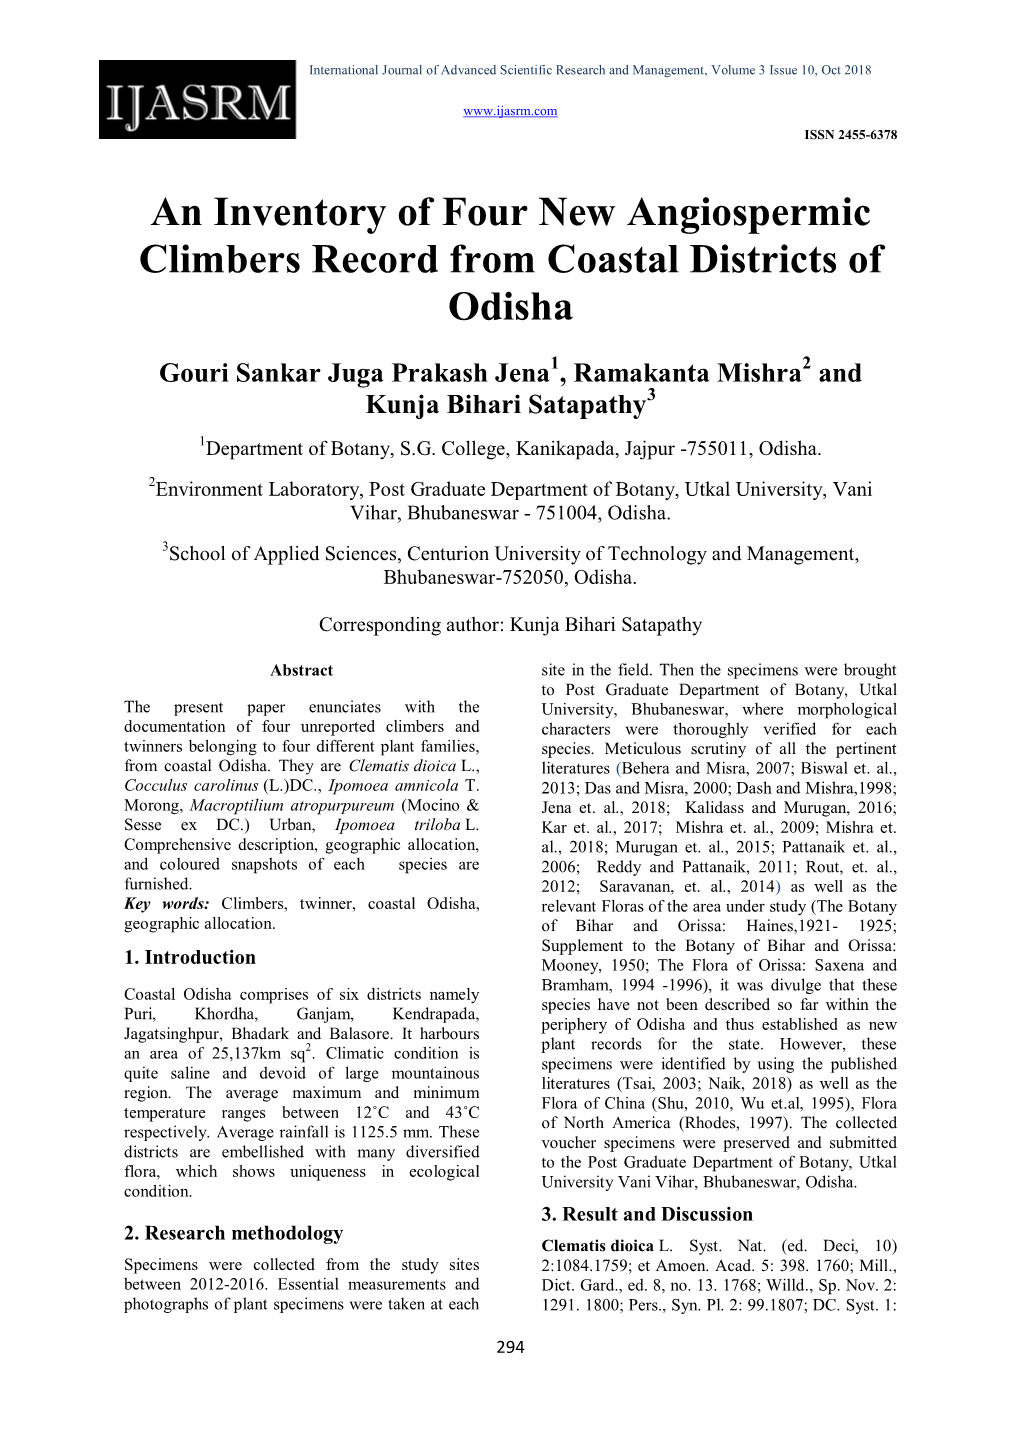 An Inventory of Four New Angiospermic Climbers Record from Coastal Districts of Odisha